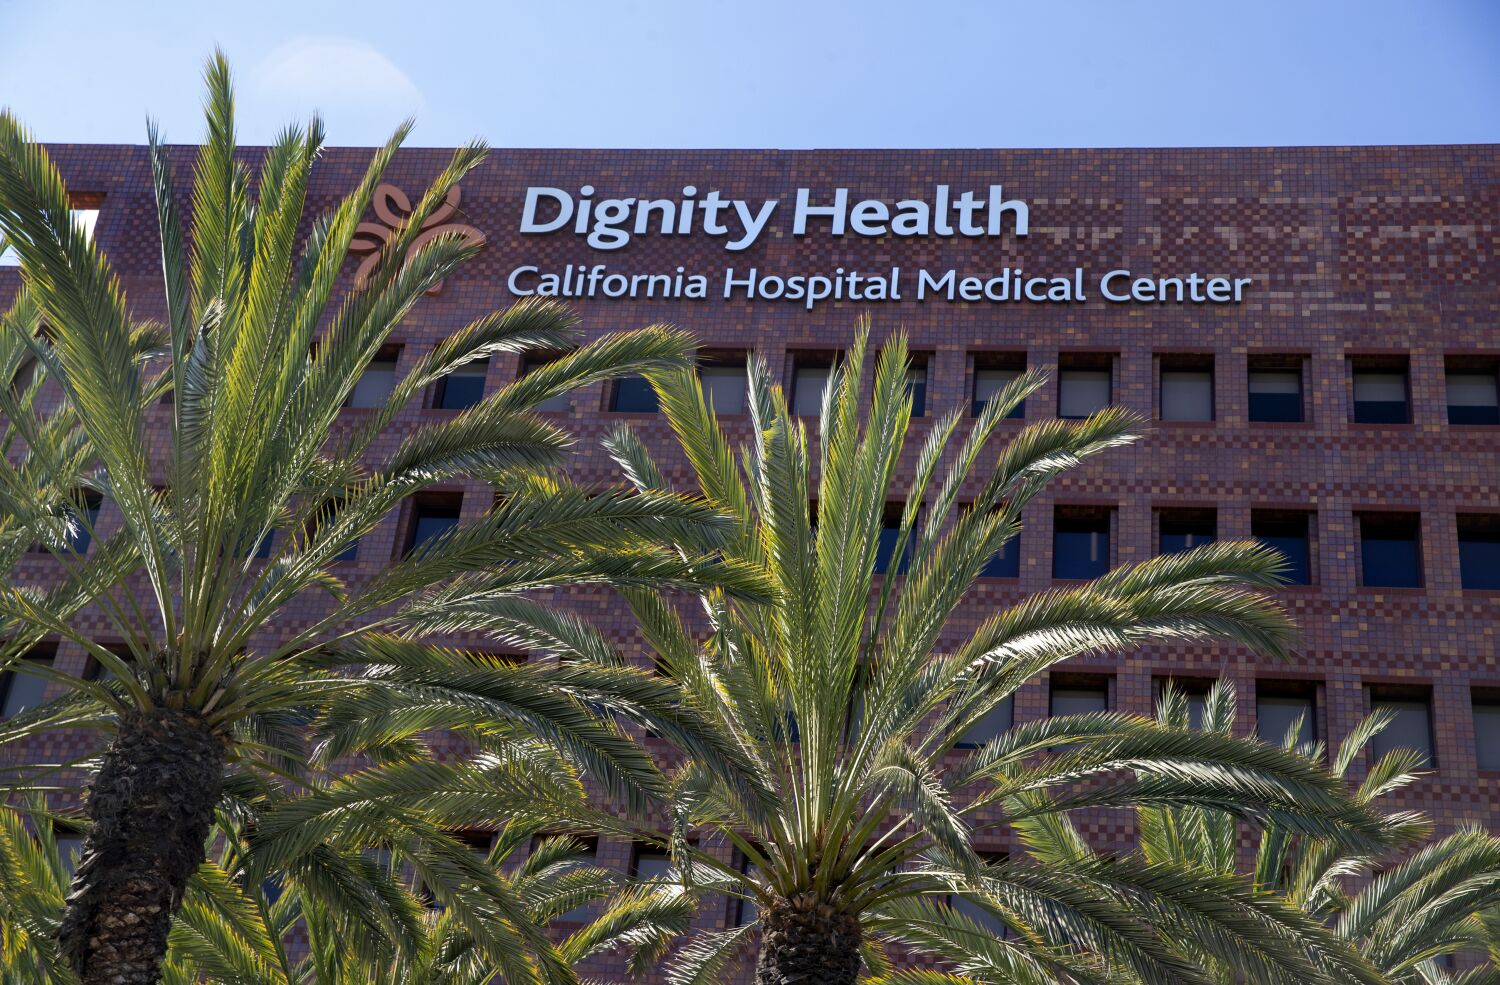 Failures at L.A. hospital led to patient's death after C-section, state finds